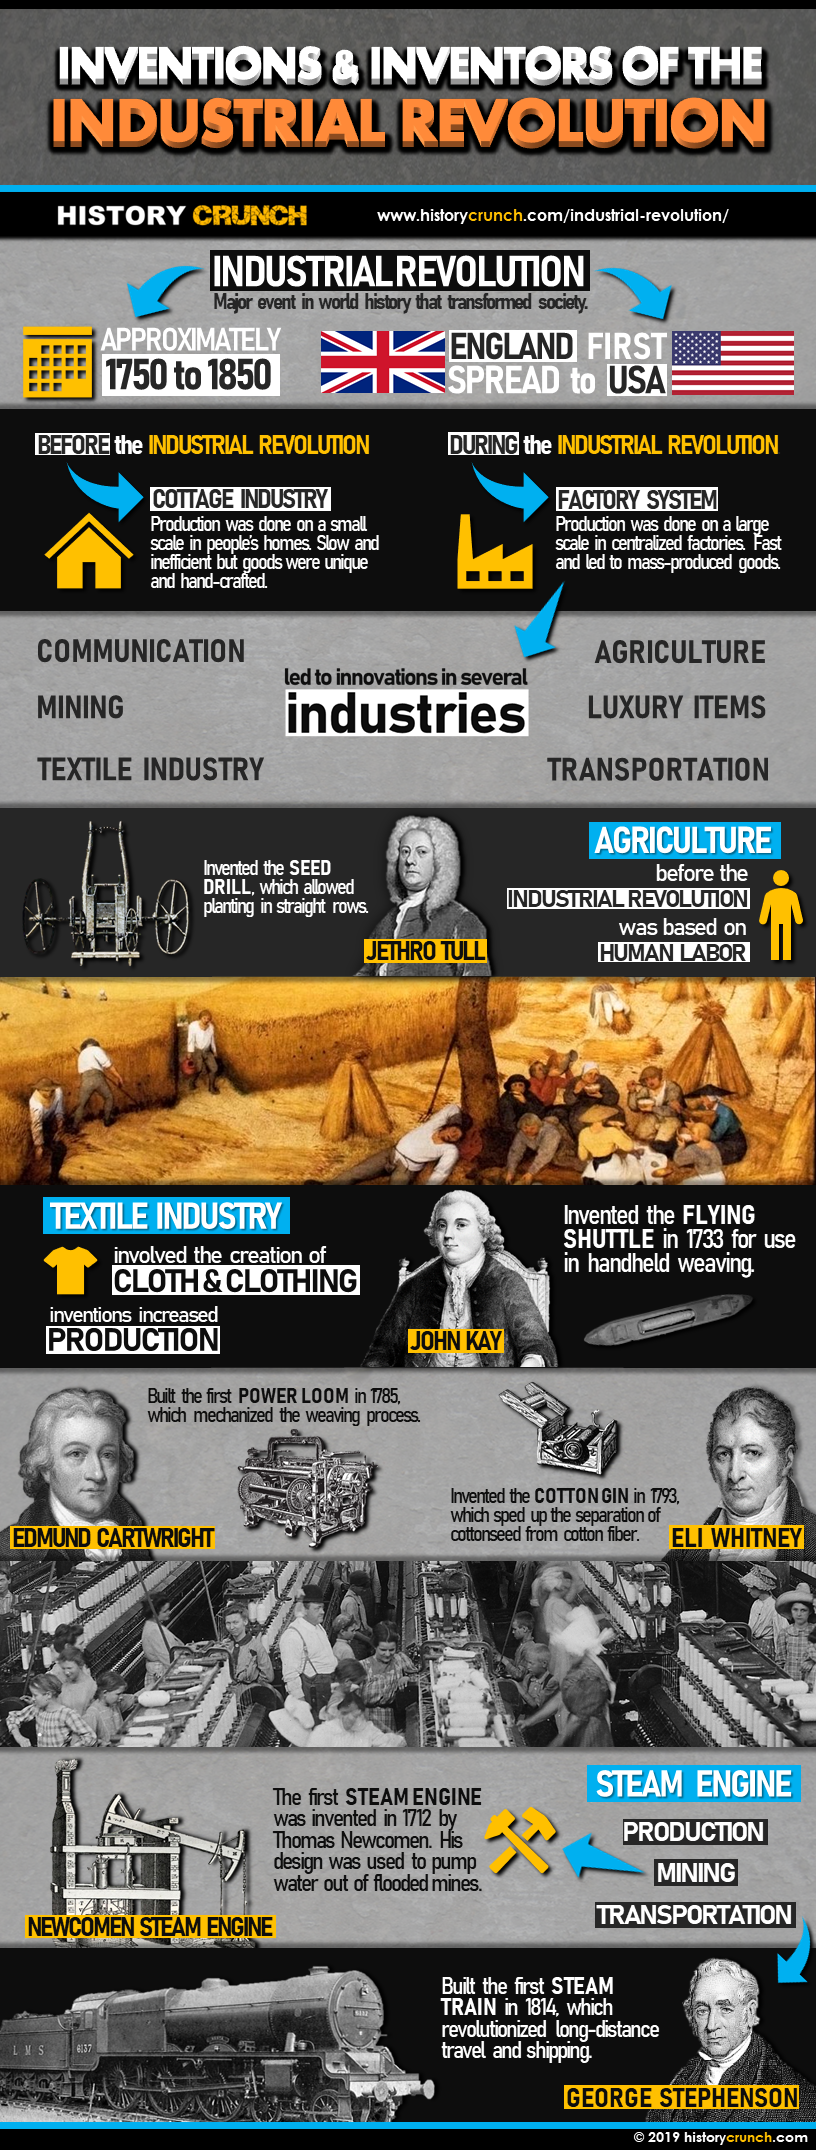 Industrial Revolution Inventions Infographic